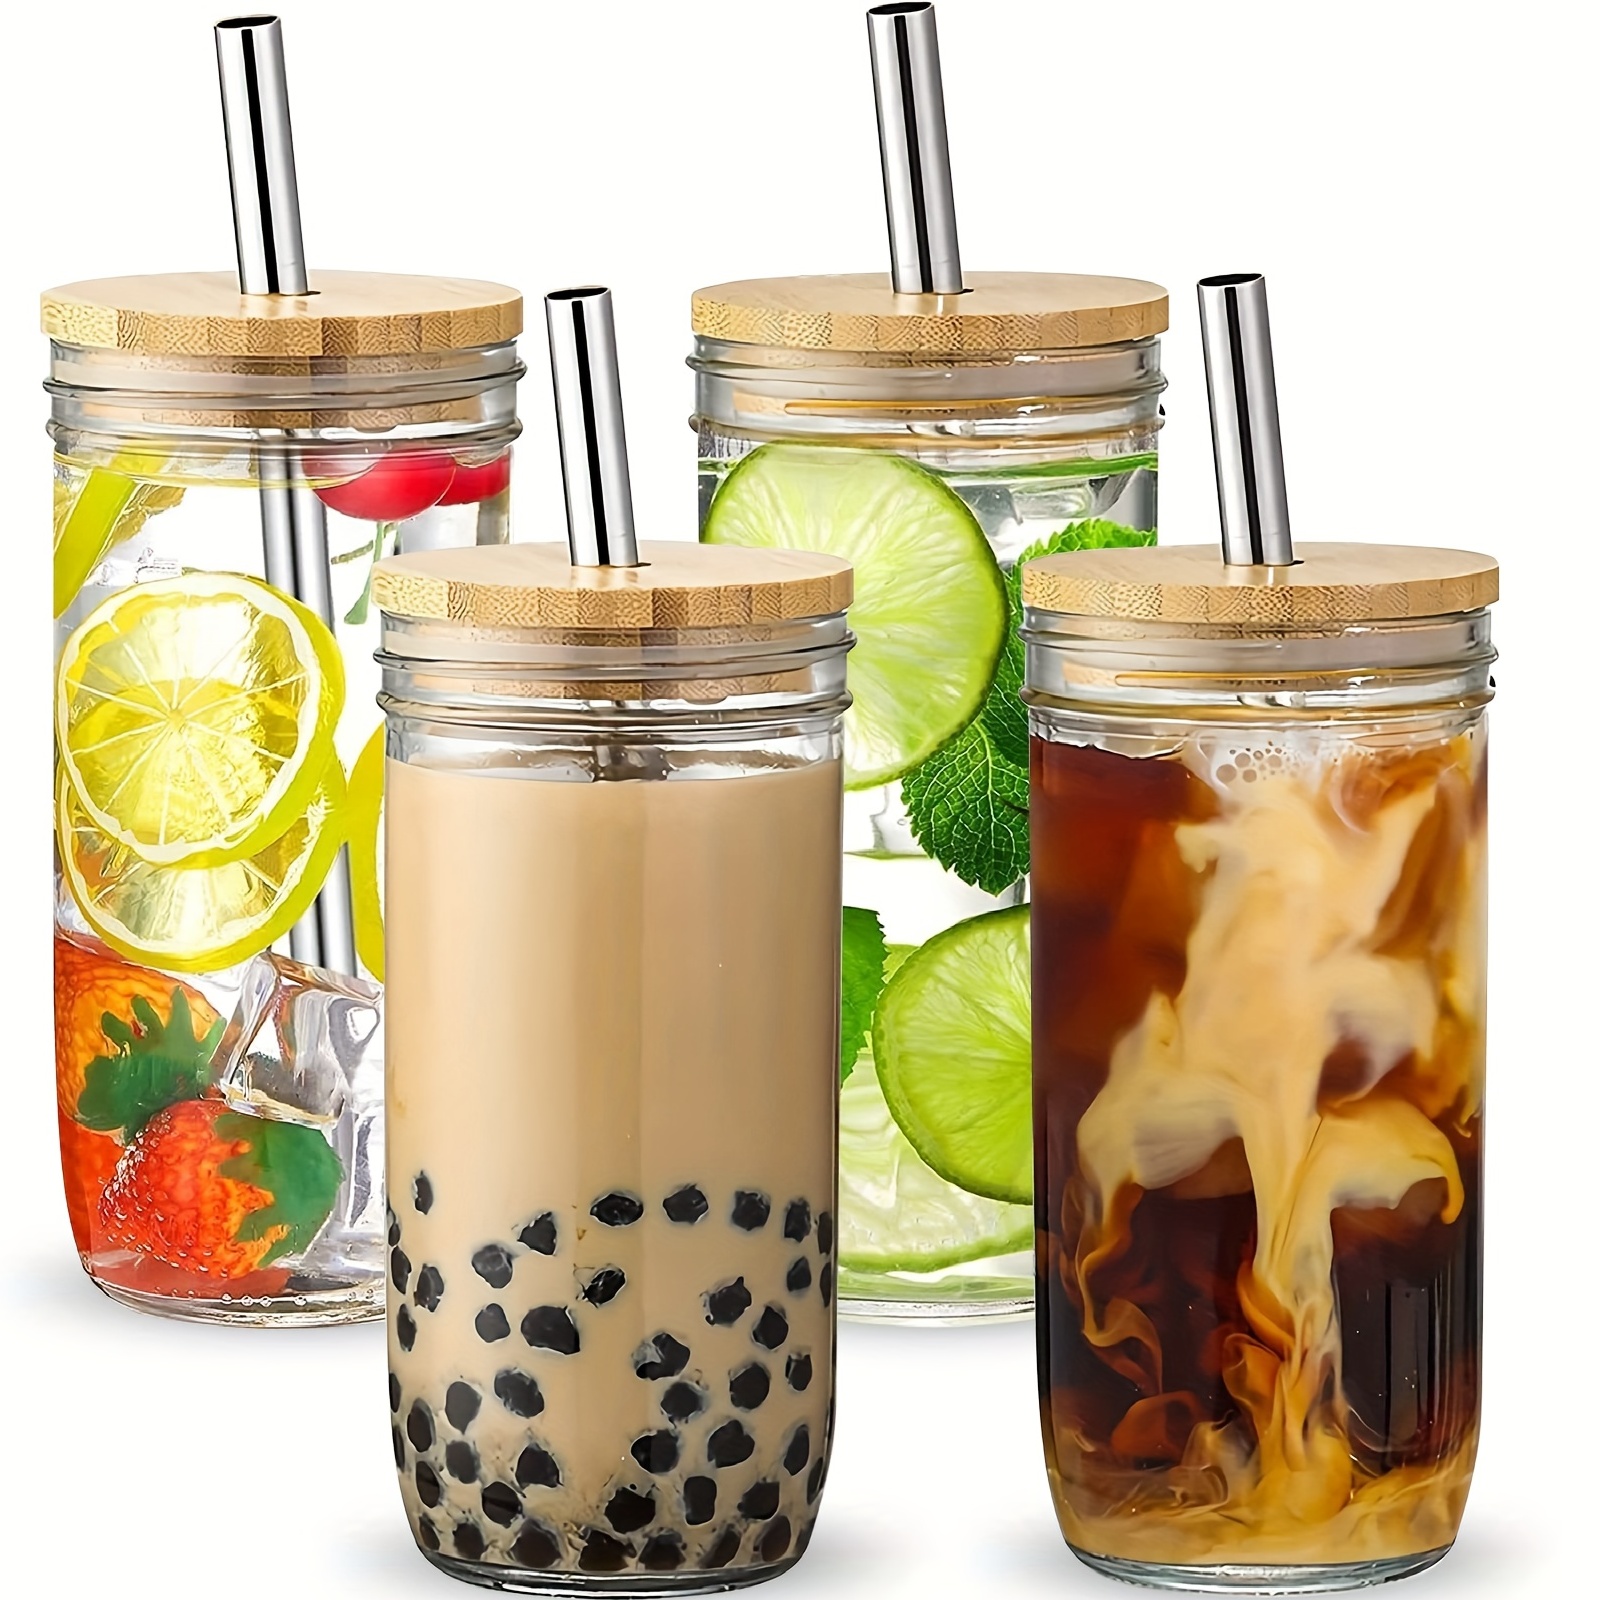 6 Pack Glass Cups Set - Glass Cups with Bamboo Lids and Glass Straw - Cute Boba Drinking Glasses, Reusable Travel Tumbler Bottle for Iced Coffee